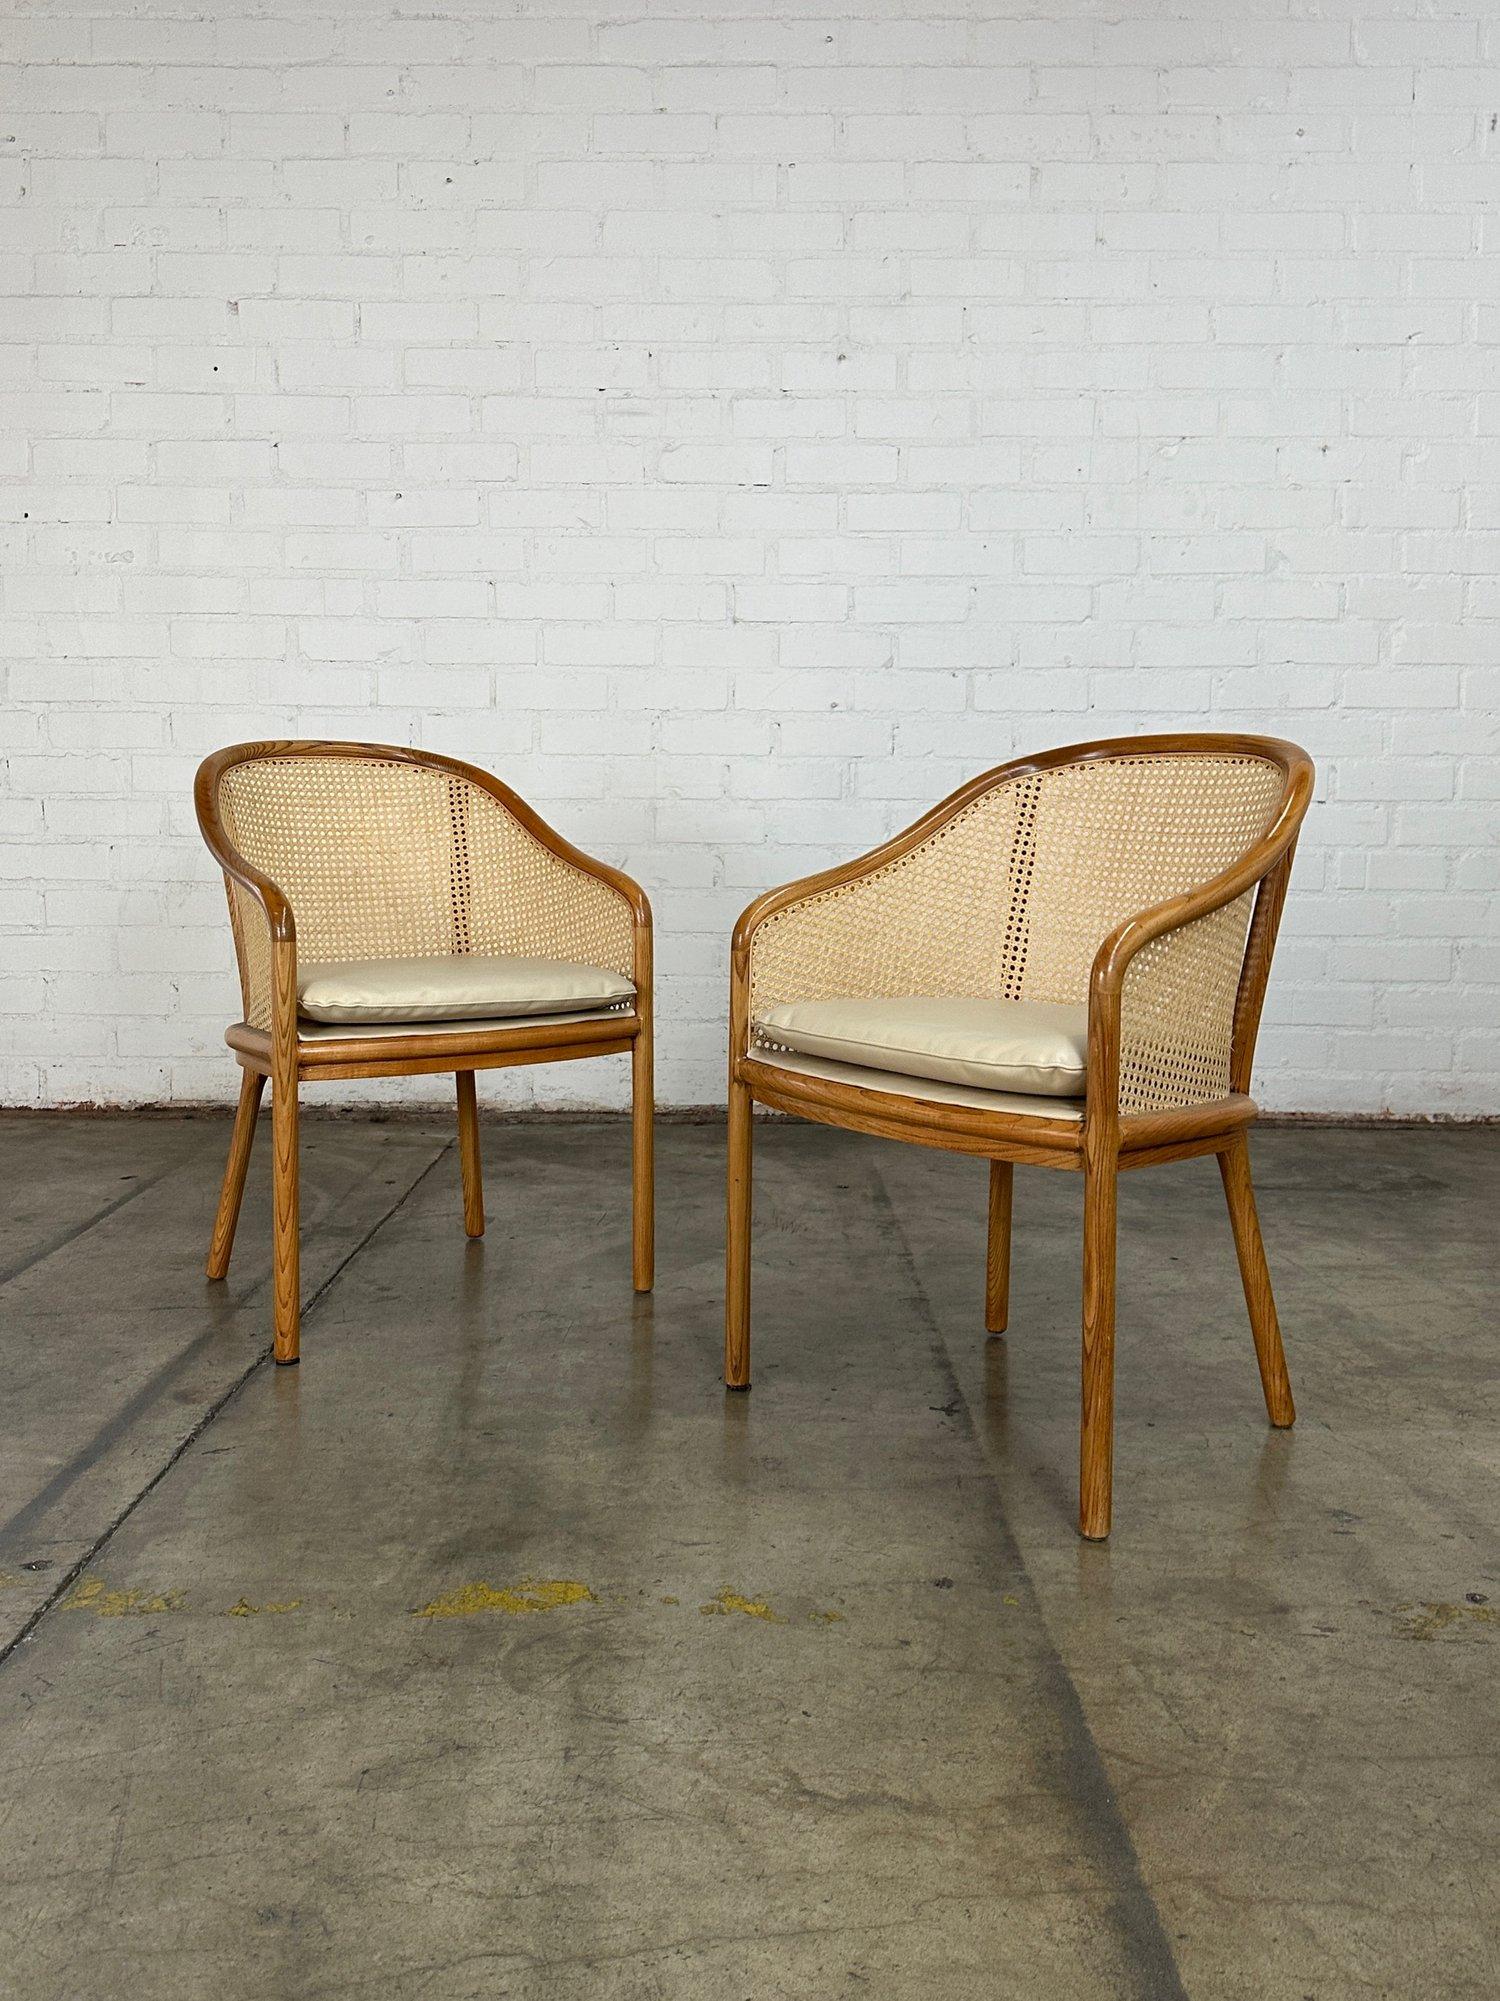 W23 D19 H32.5 SW20 SD18 SH18 AH24

Pair of Ward Bennet side chairs in great vintage condition. Chairs have original manufacture tag underneath. Both chairs are structurally sound with no major areas of wear. Cane has no visible areas of wear and no